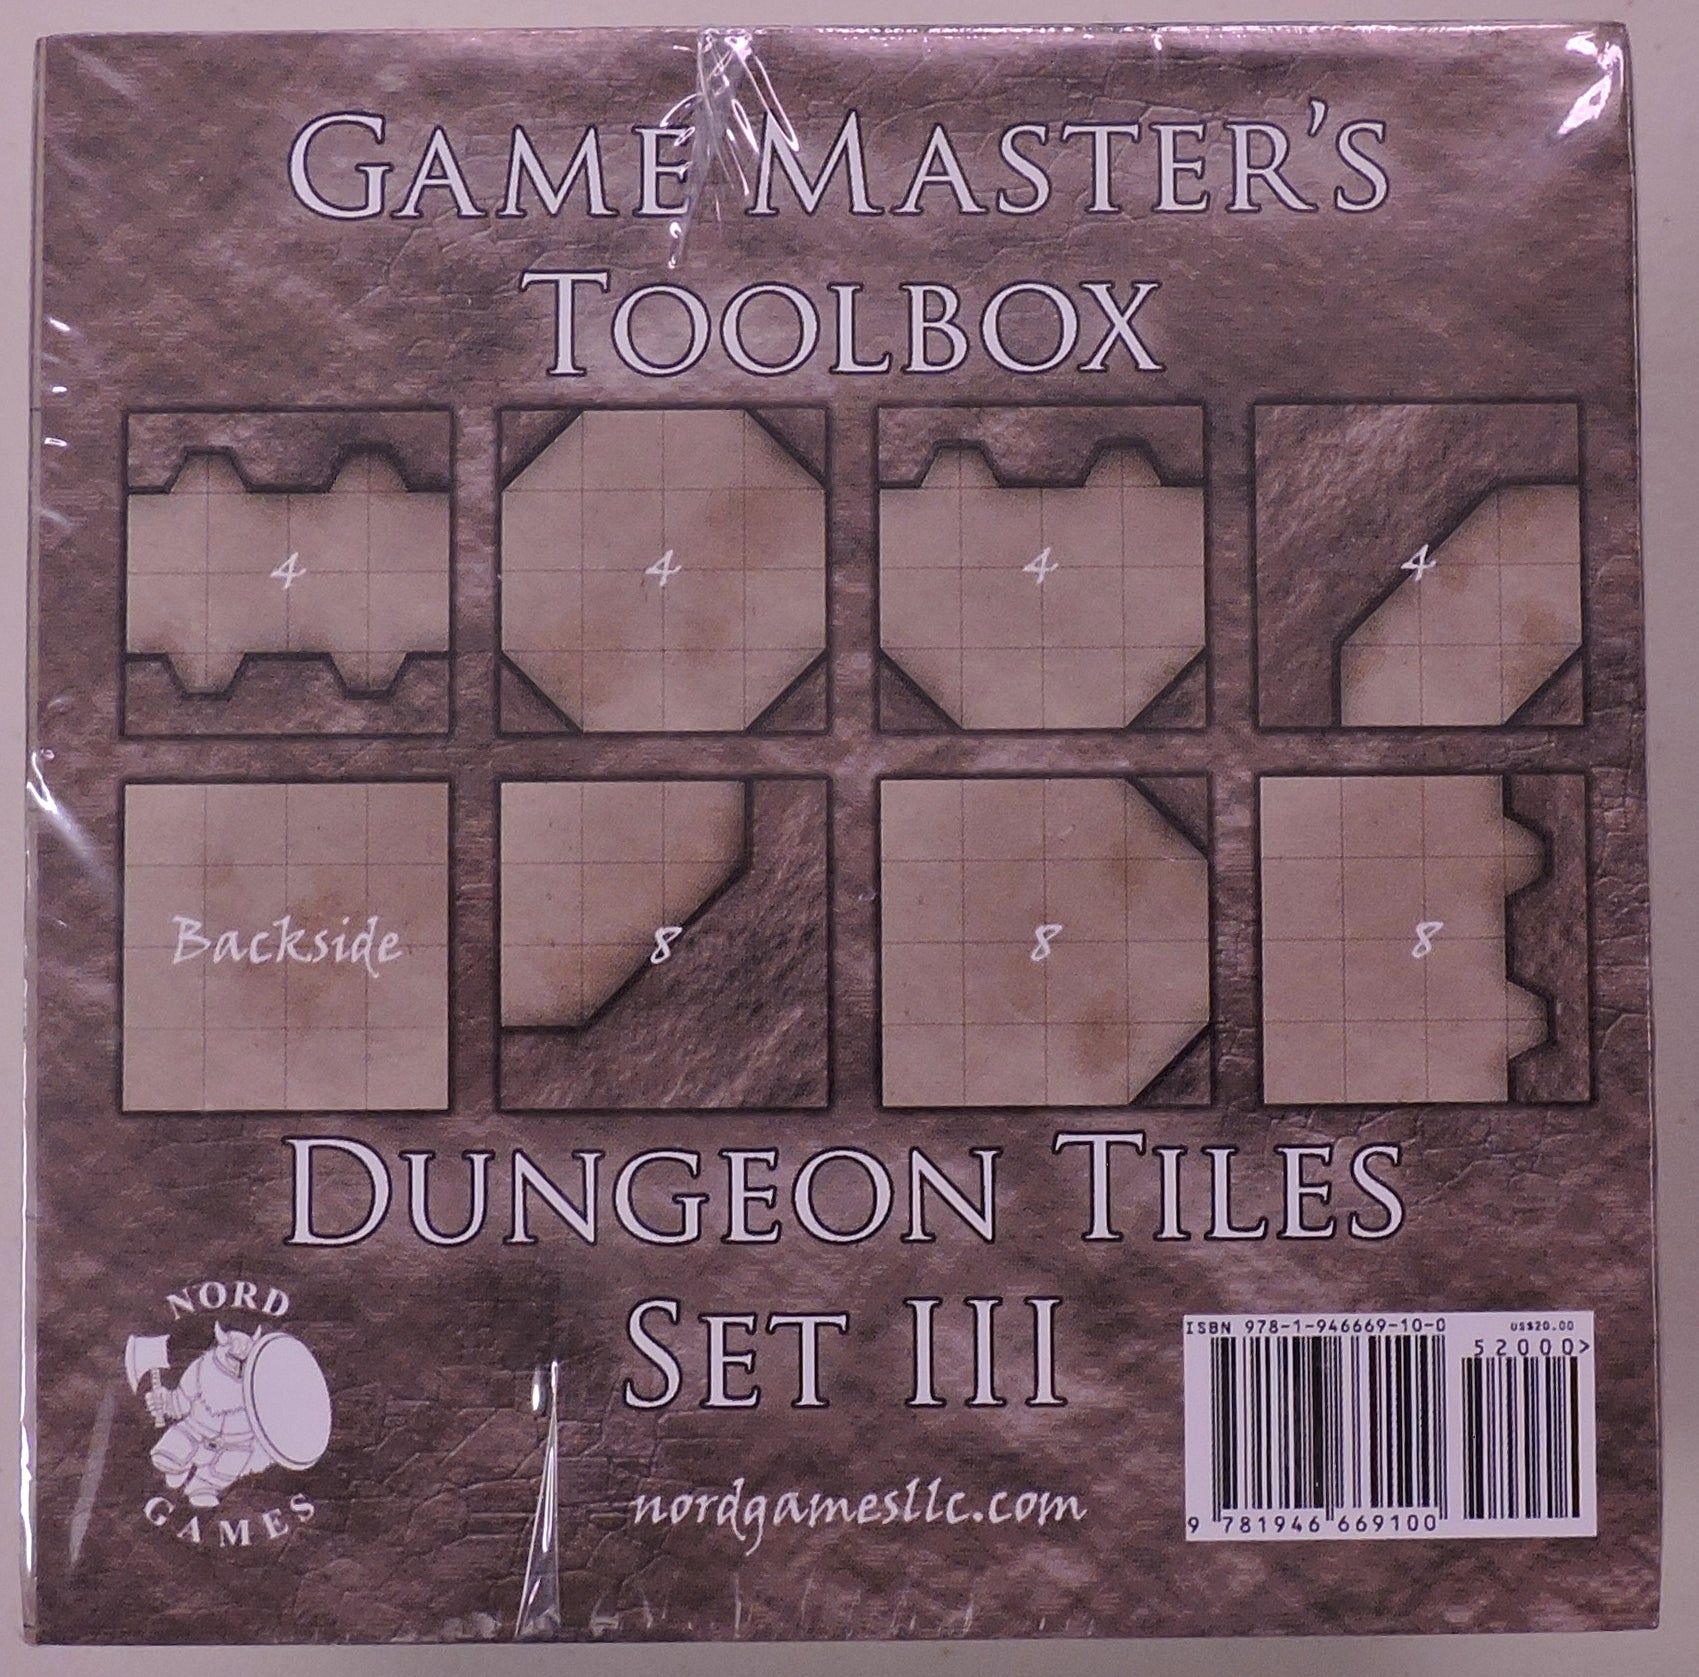 GAME MASTER'S TOOLBOX DUNGEON TILES SET III | BD Cosmos